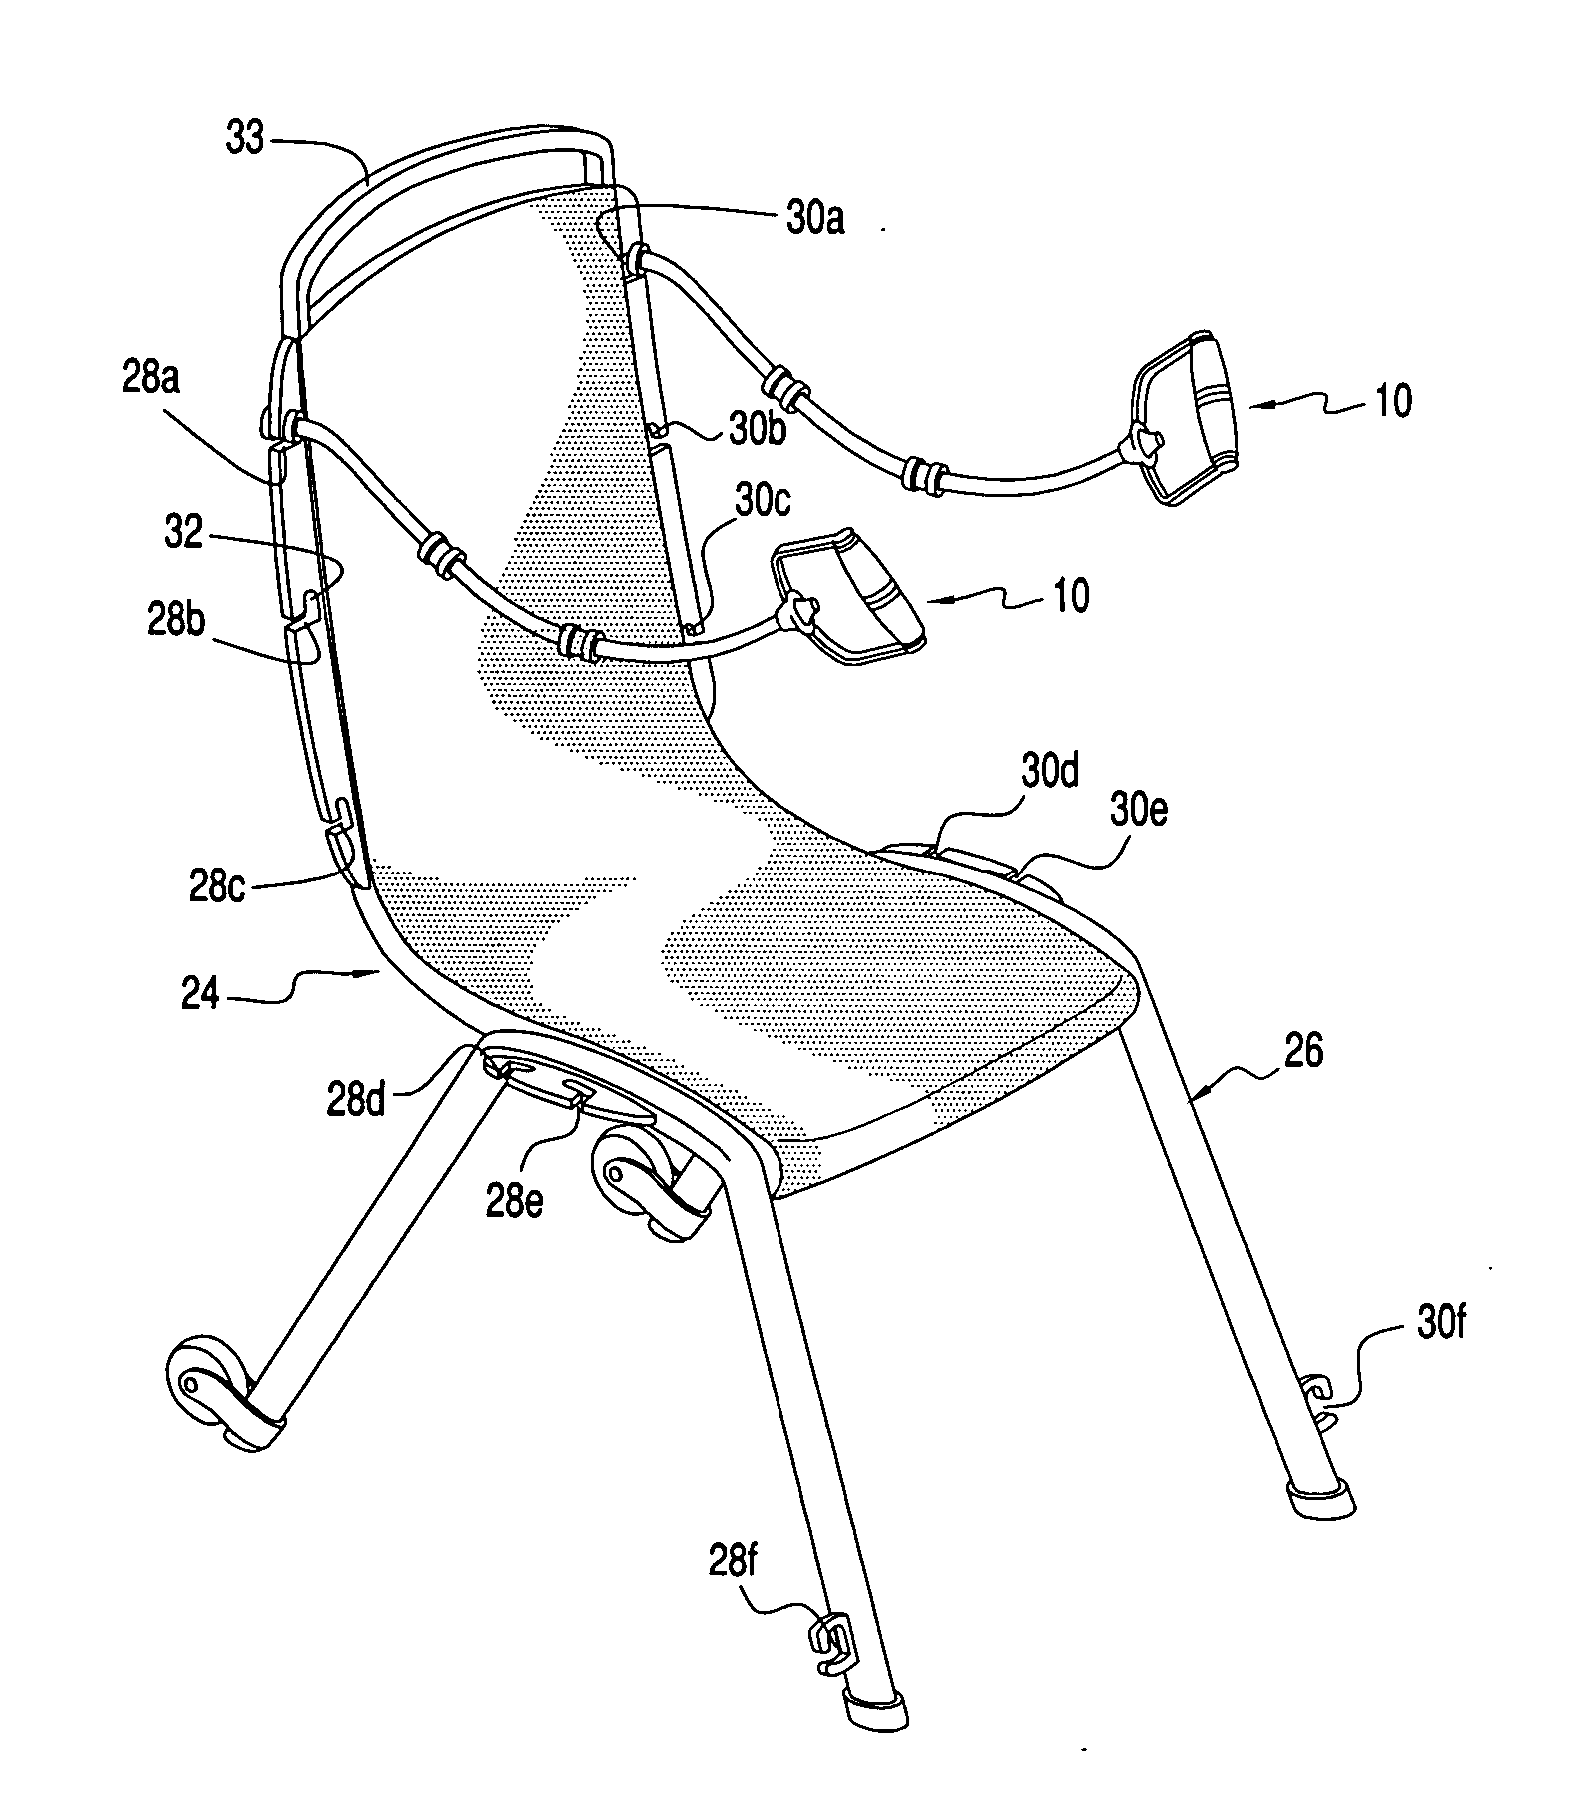 Exercise system using exercise resistance cables